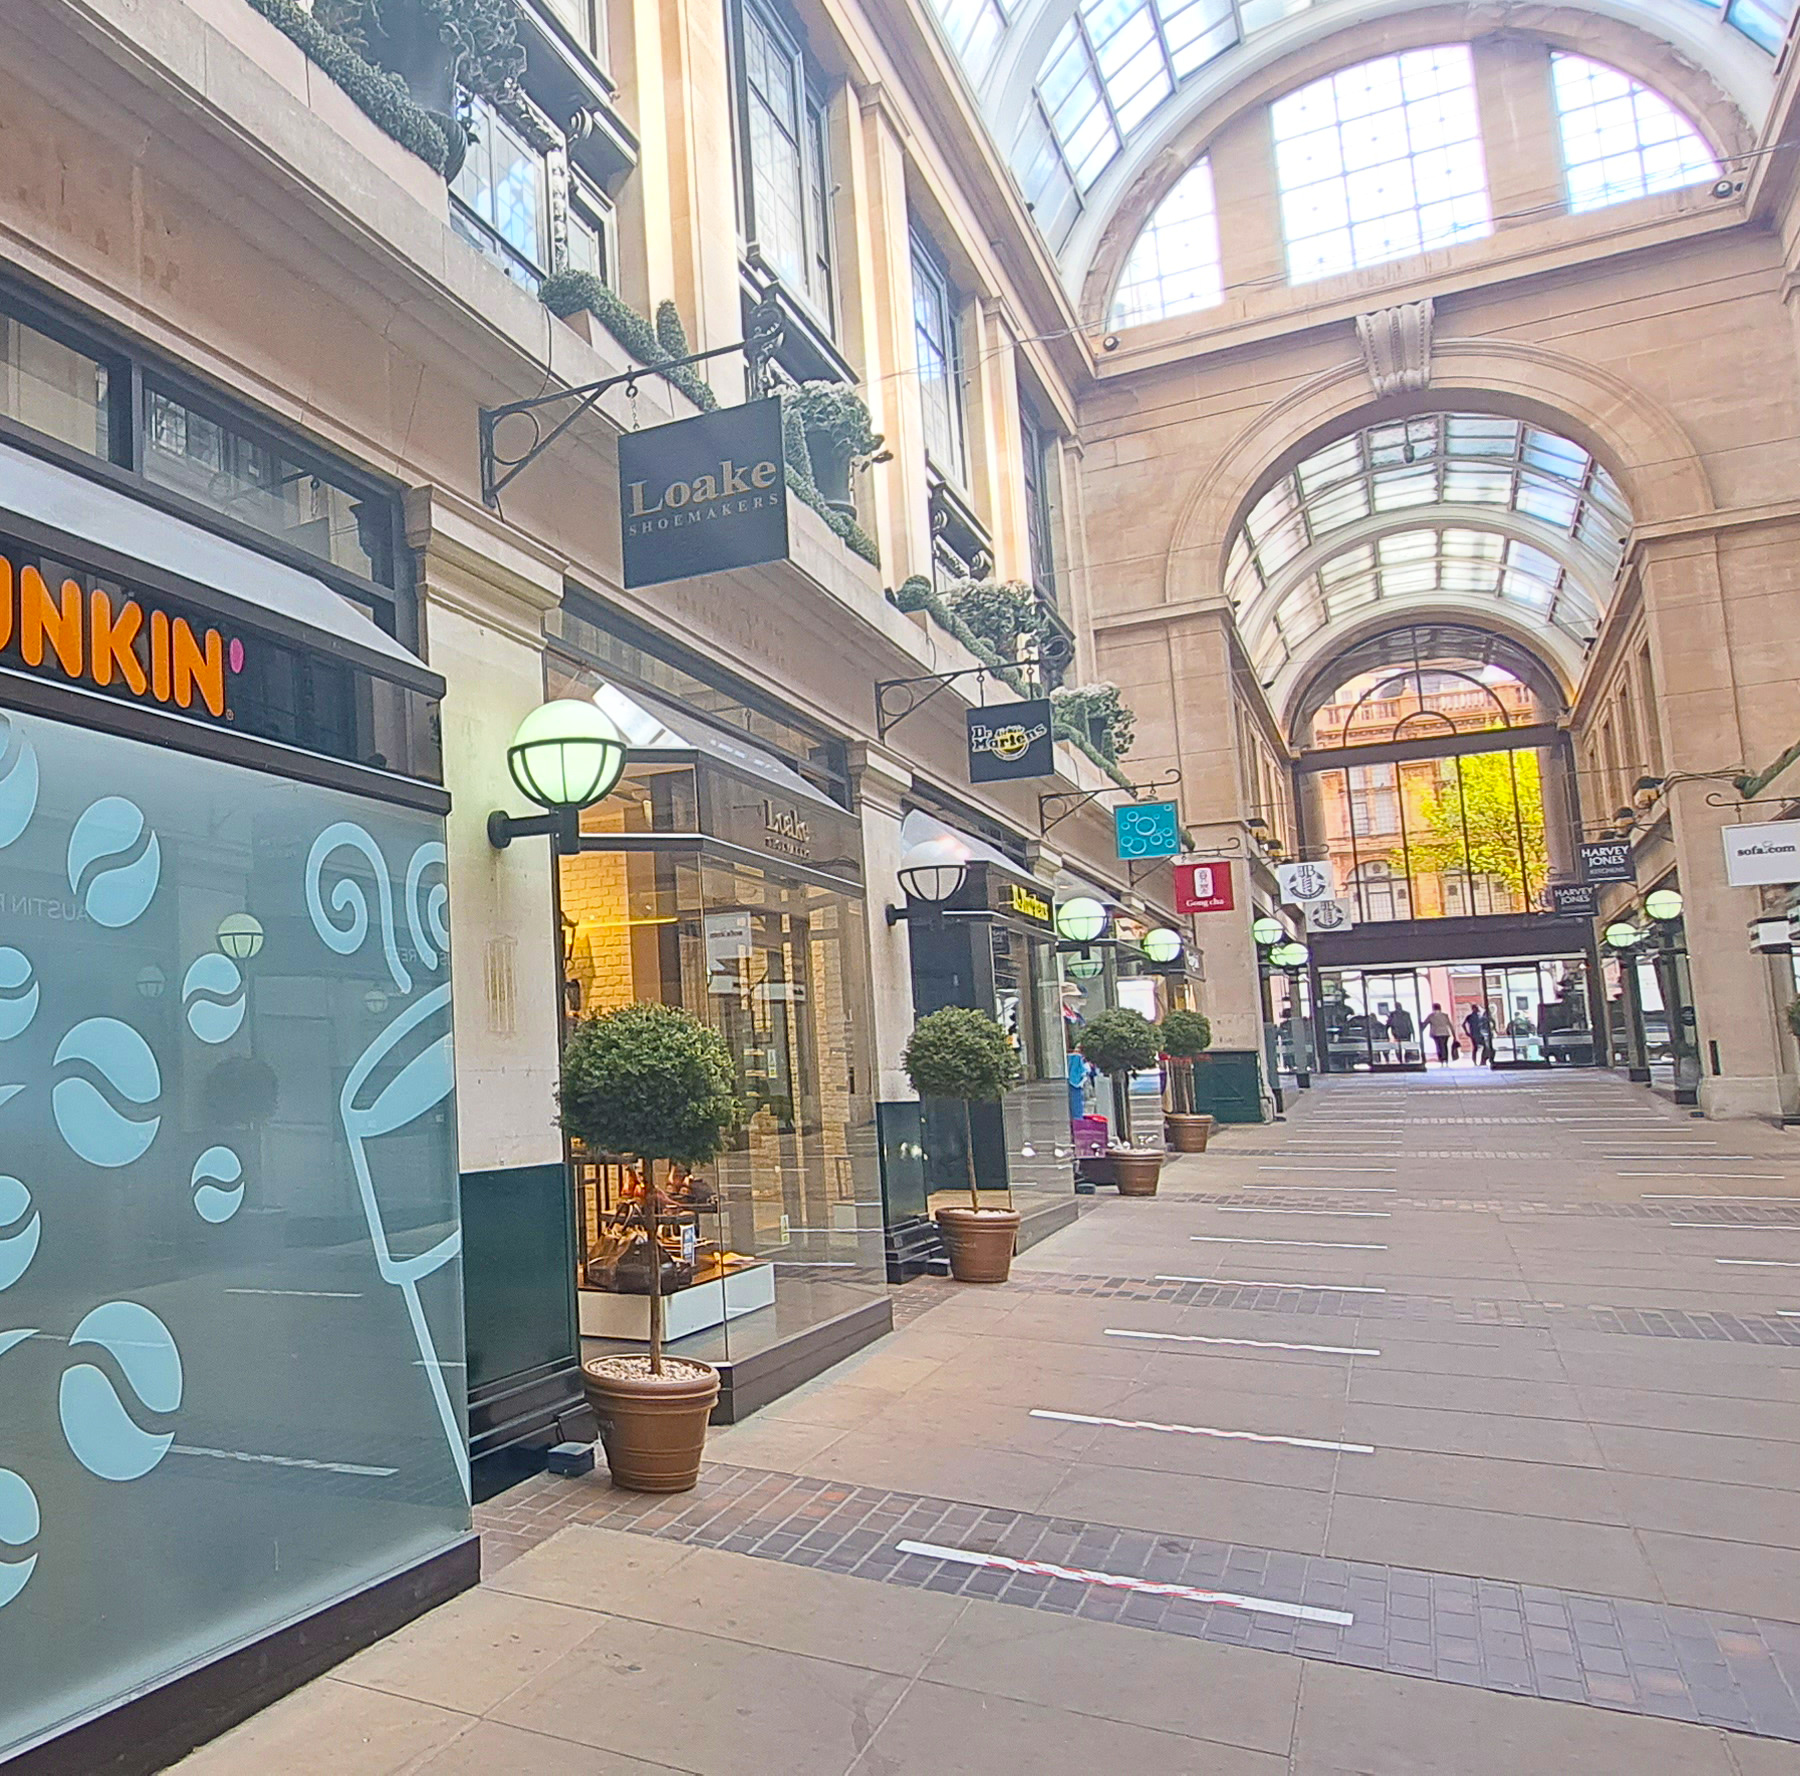 Rejuvenation of Exchange Arcade Poised to Attract a New Demographic of Shoppers